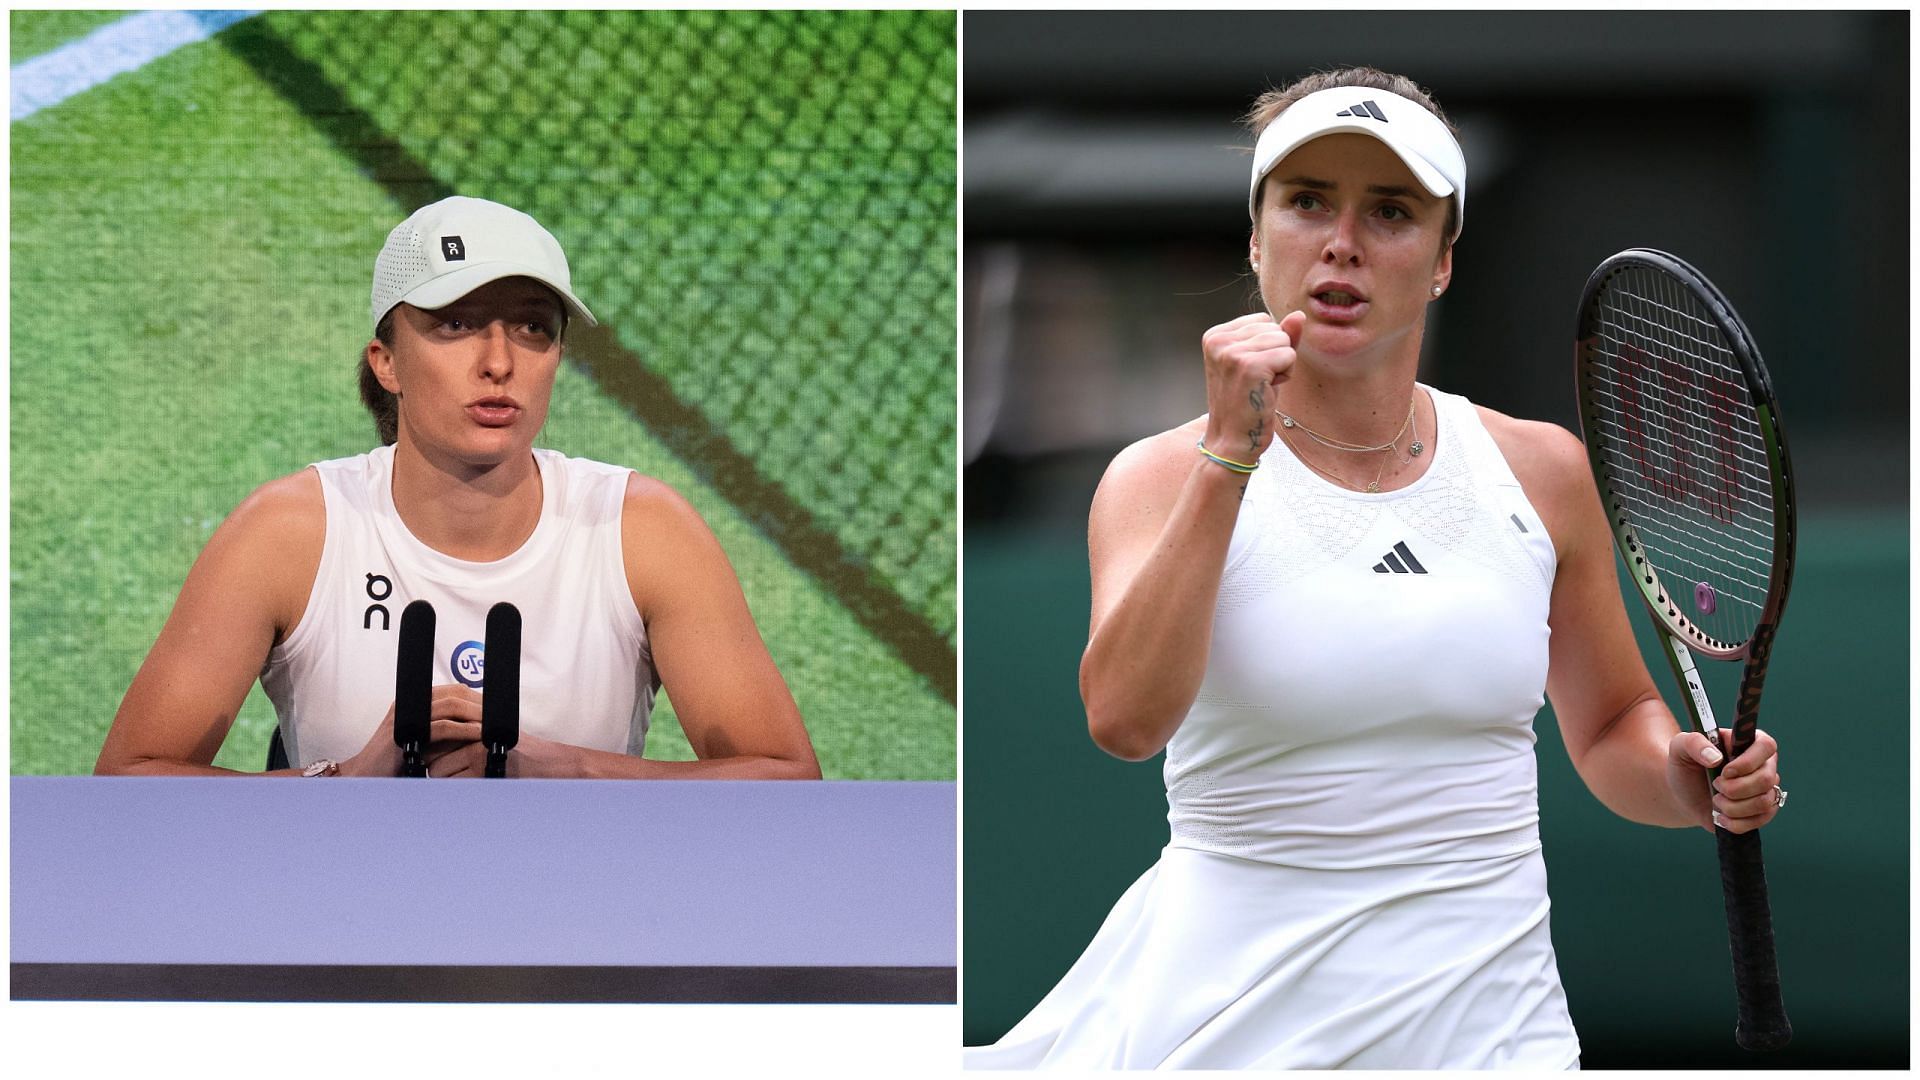 Iga Swaitek has stated her admiration for Elina Svitolina, who has returned to the WTA tour after giving birth to her first child in October last year.